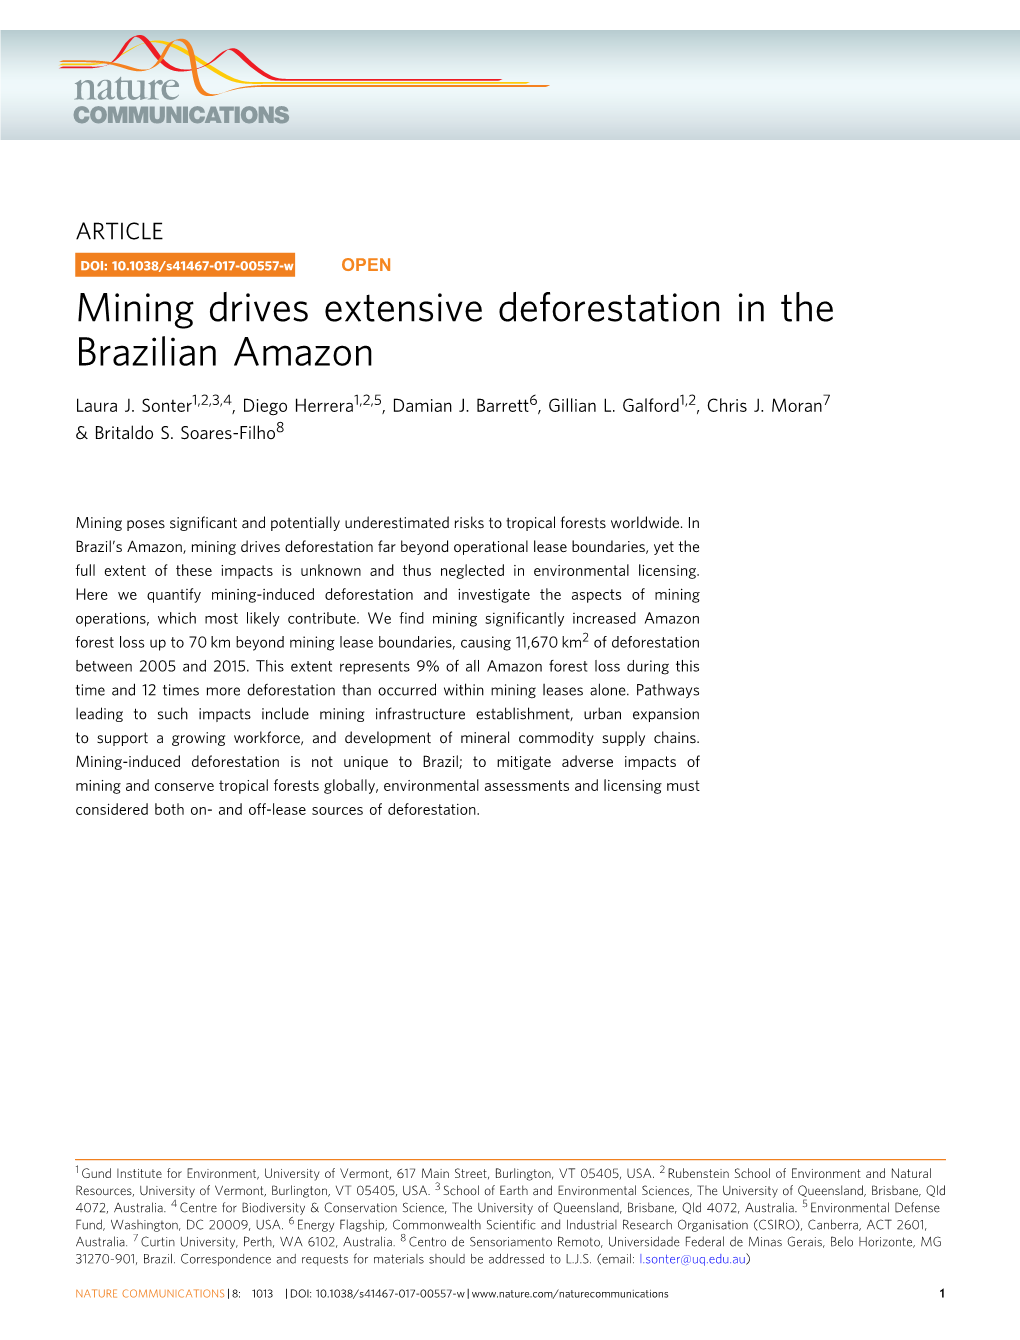 Mining Drives Extensive Deforestation in the Brazilian Amazon